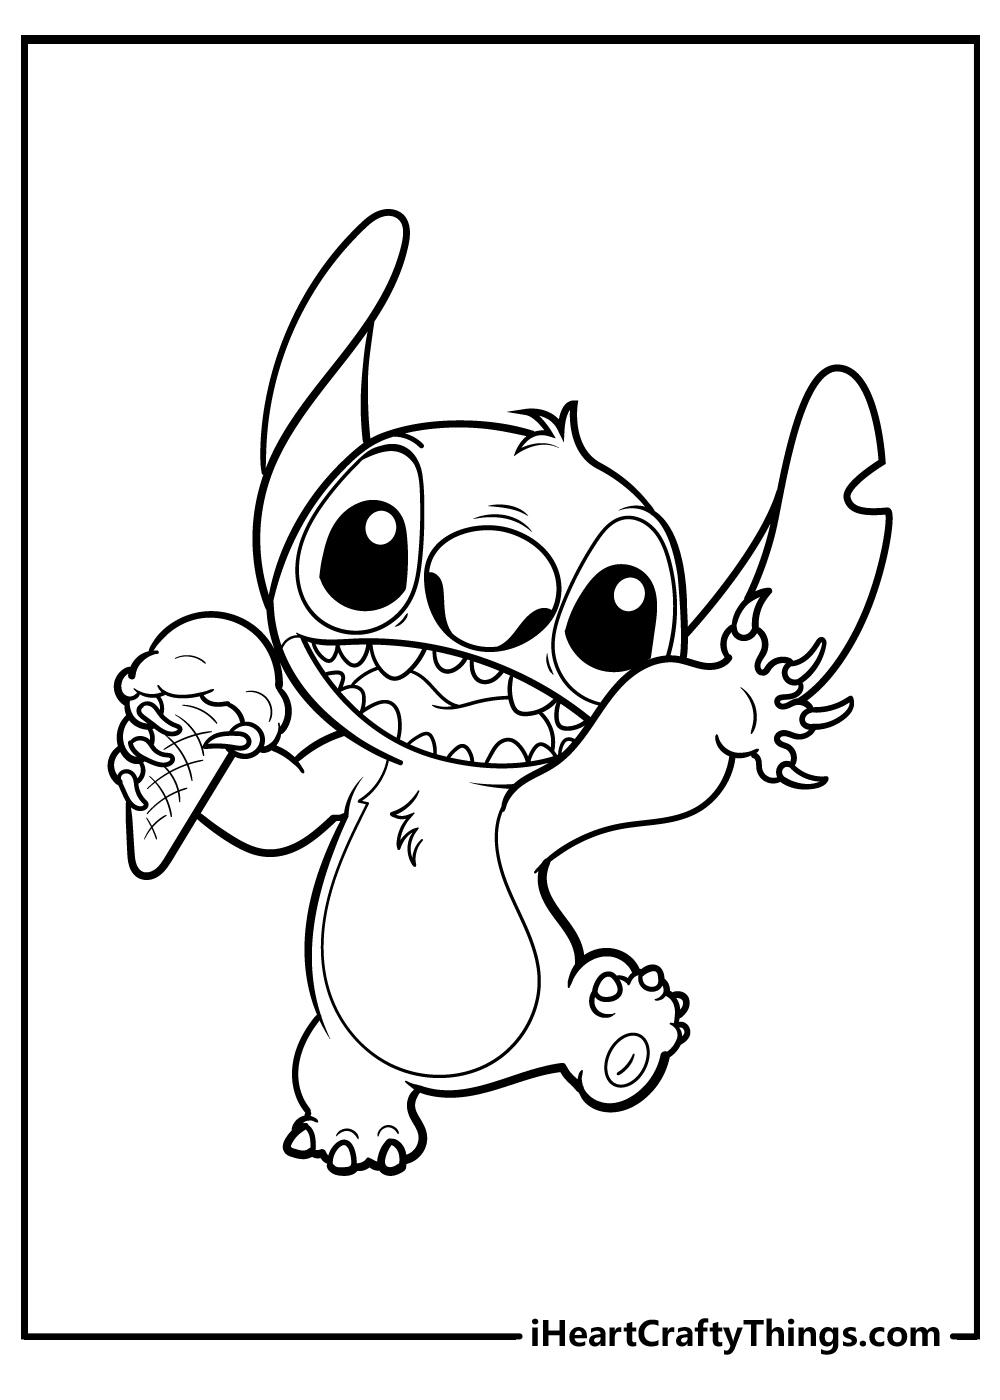 Stitch And Angel Coloring Pages   Coloring Home